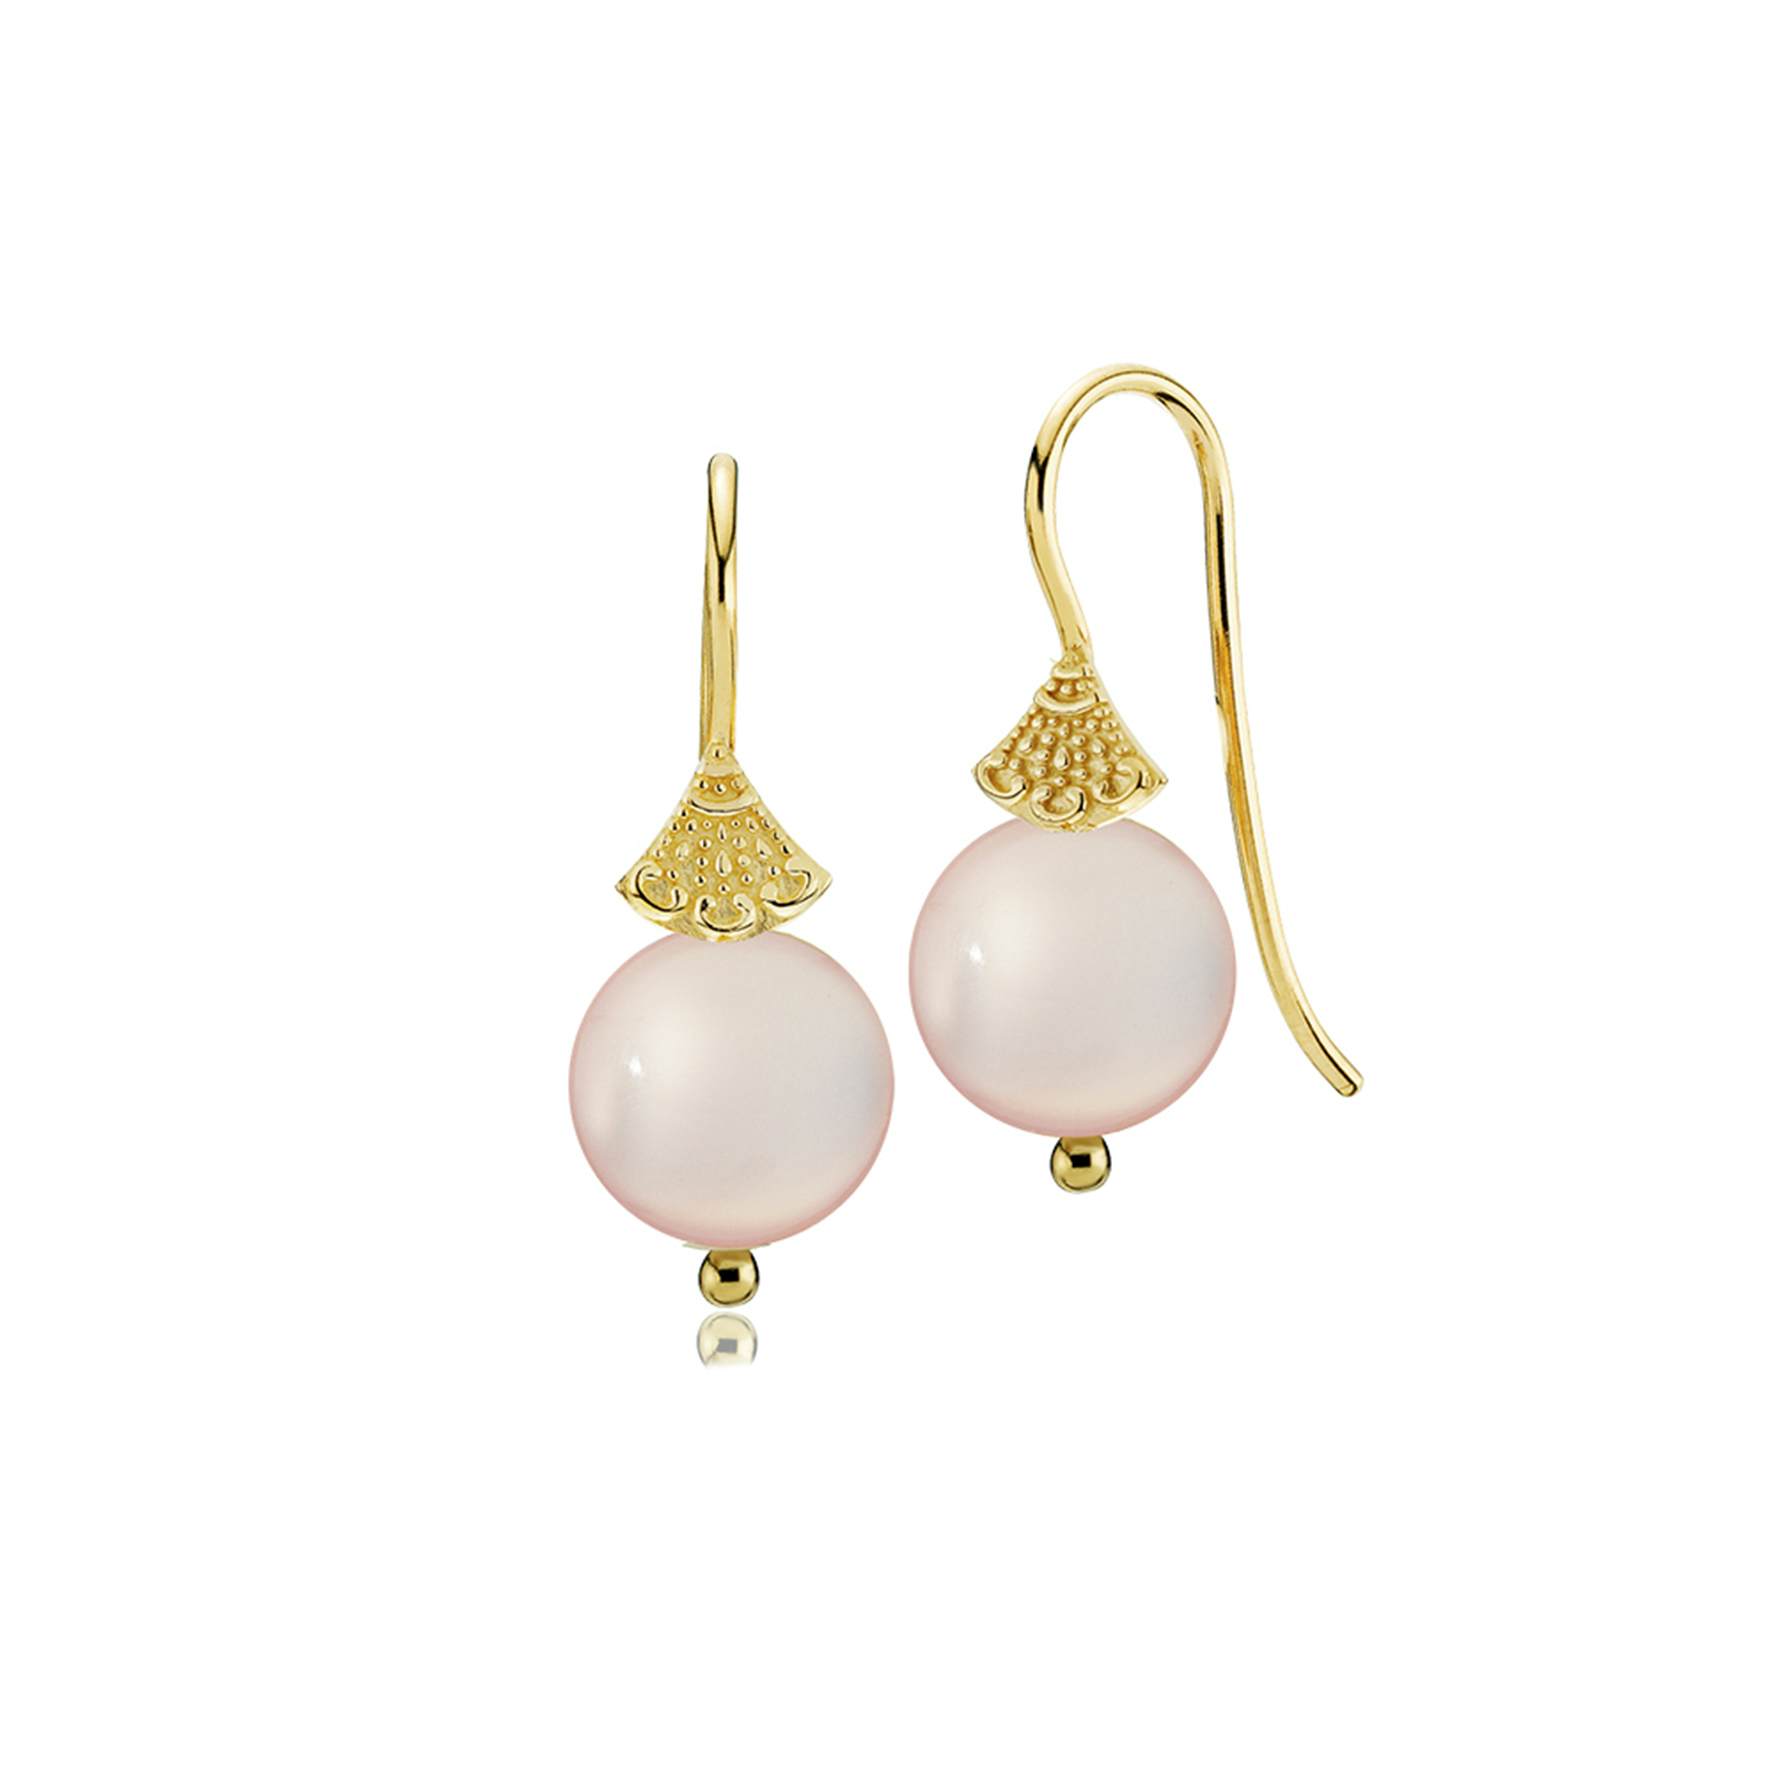 Bohemian Earrings Small Pink from Izabel Camille in Goldplated-Silver Sterling 925|Pink